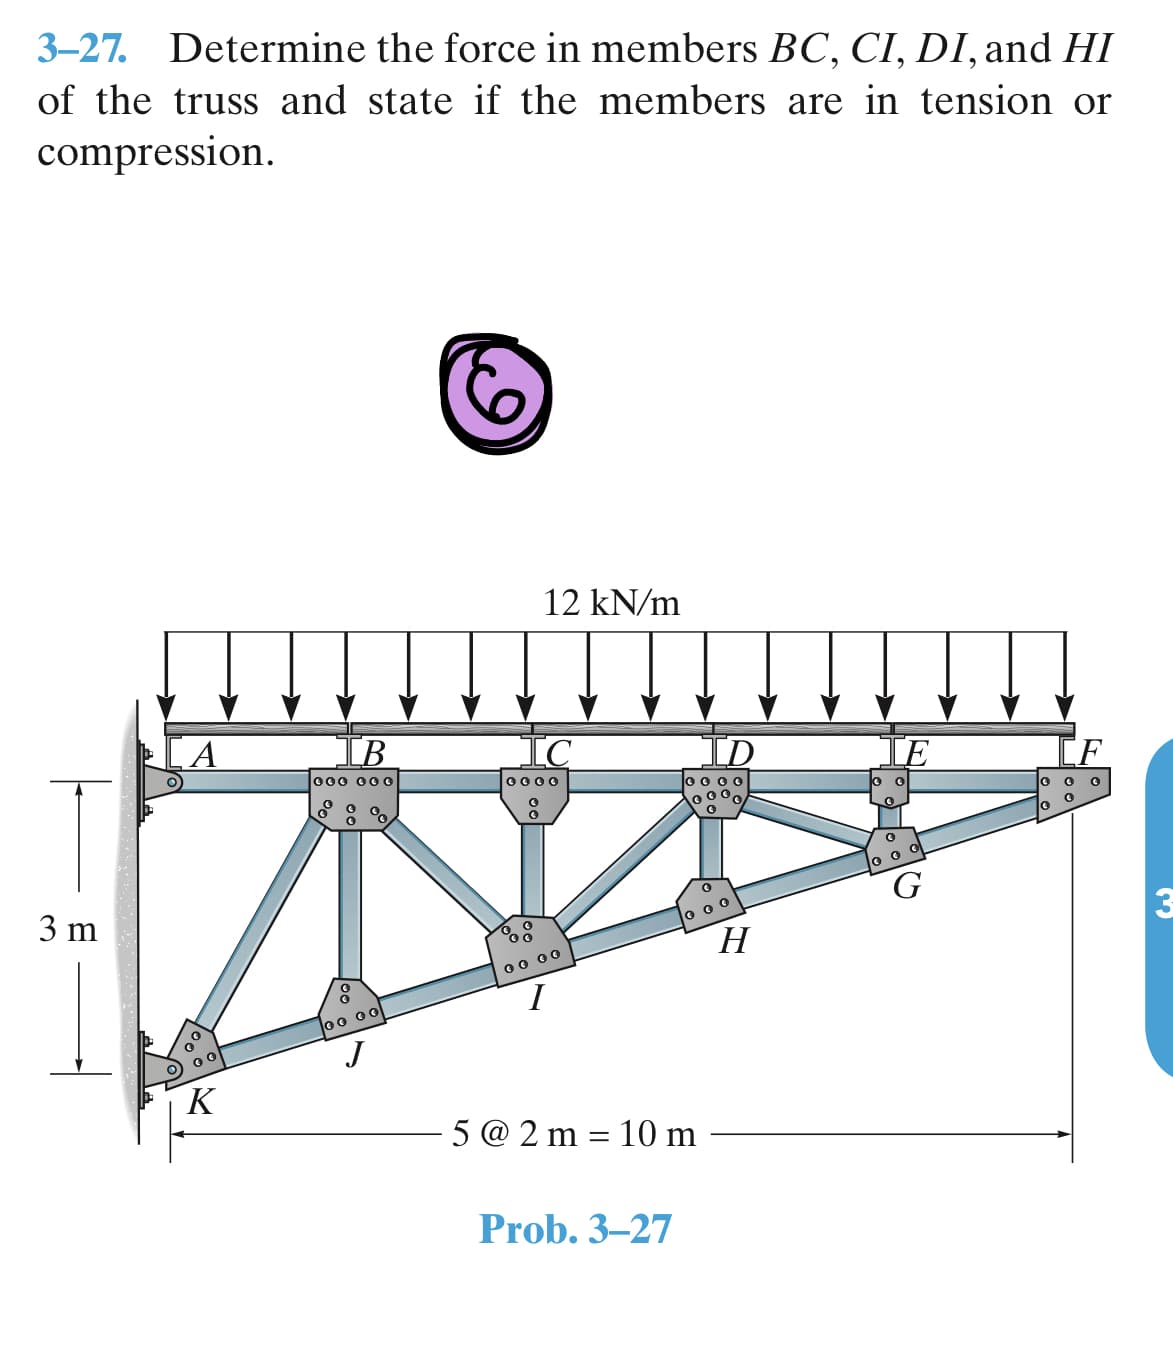 3-27. Determine the force in members BC, CI, DI, and HI
of the truss and state if the members are in tension or
compression.
3 m
K
B
000 000
8
00 00
J
12 kN/m
IC
0000
00 00
I
5 @ 2 m 10 m
=
Prob. 3-27
D
0 0 0 0
H
E
O
G
0